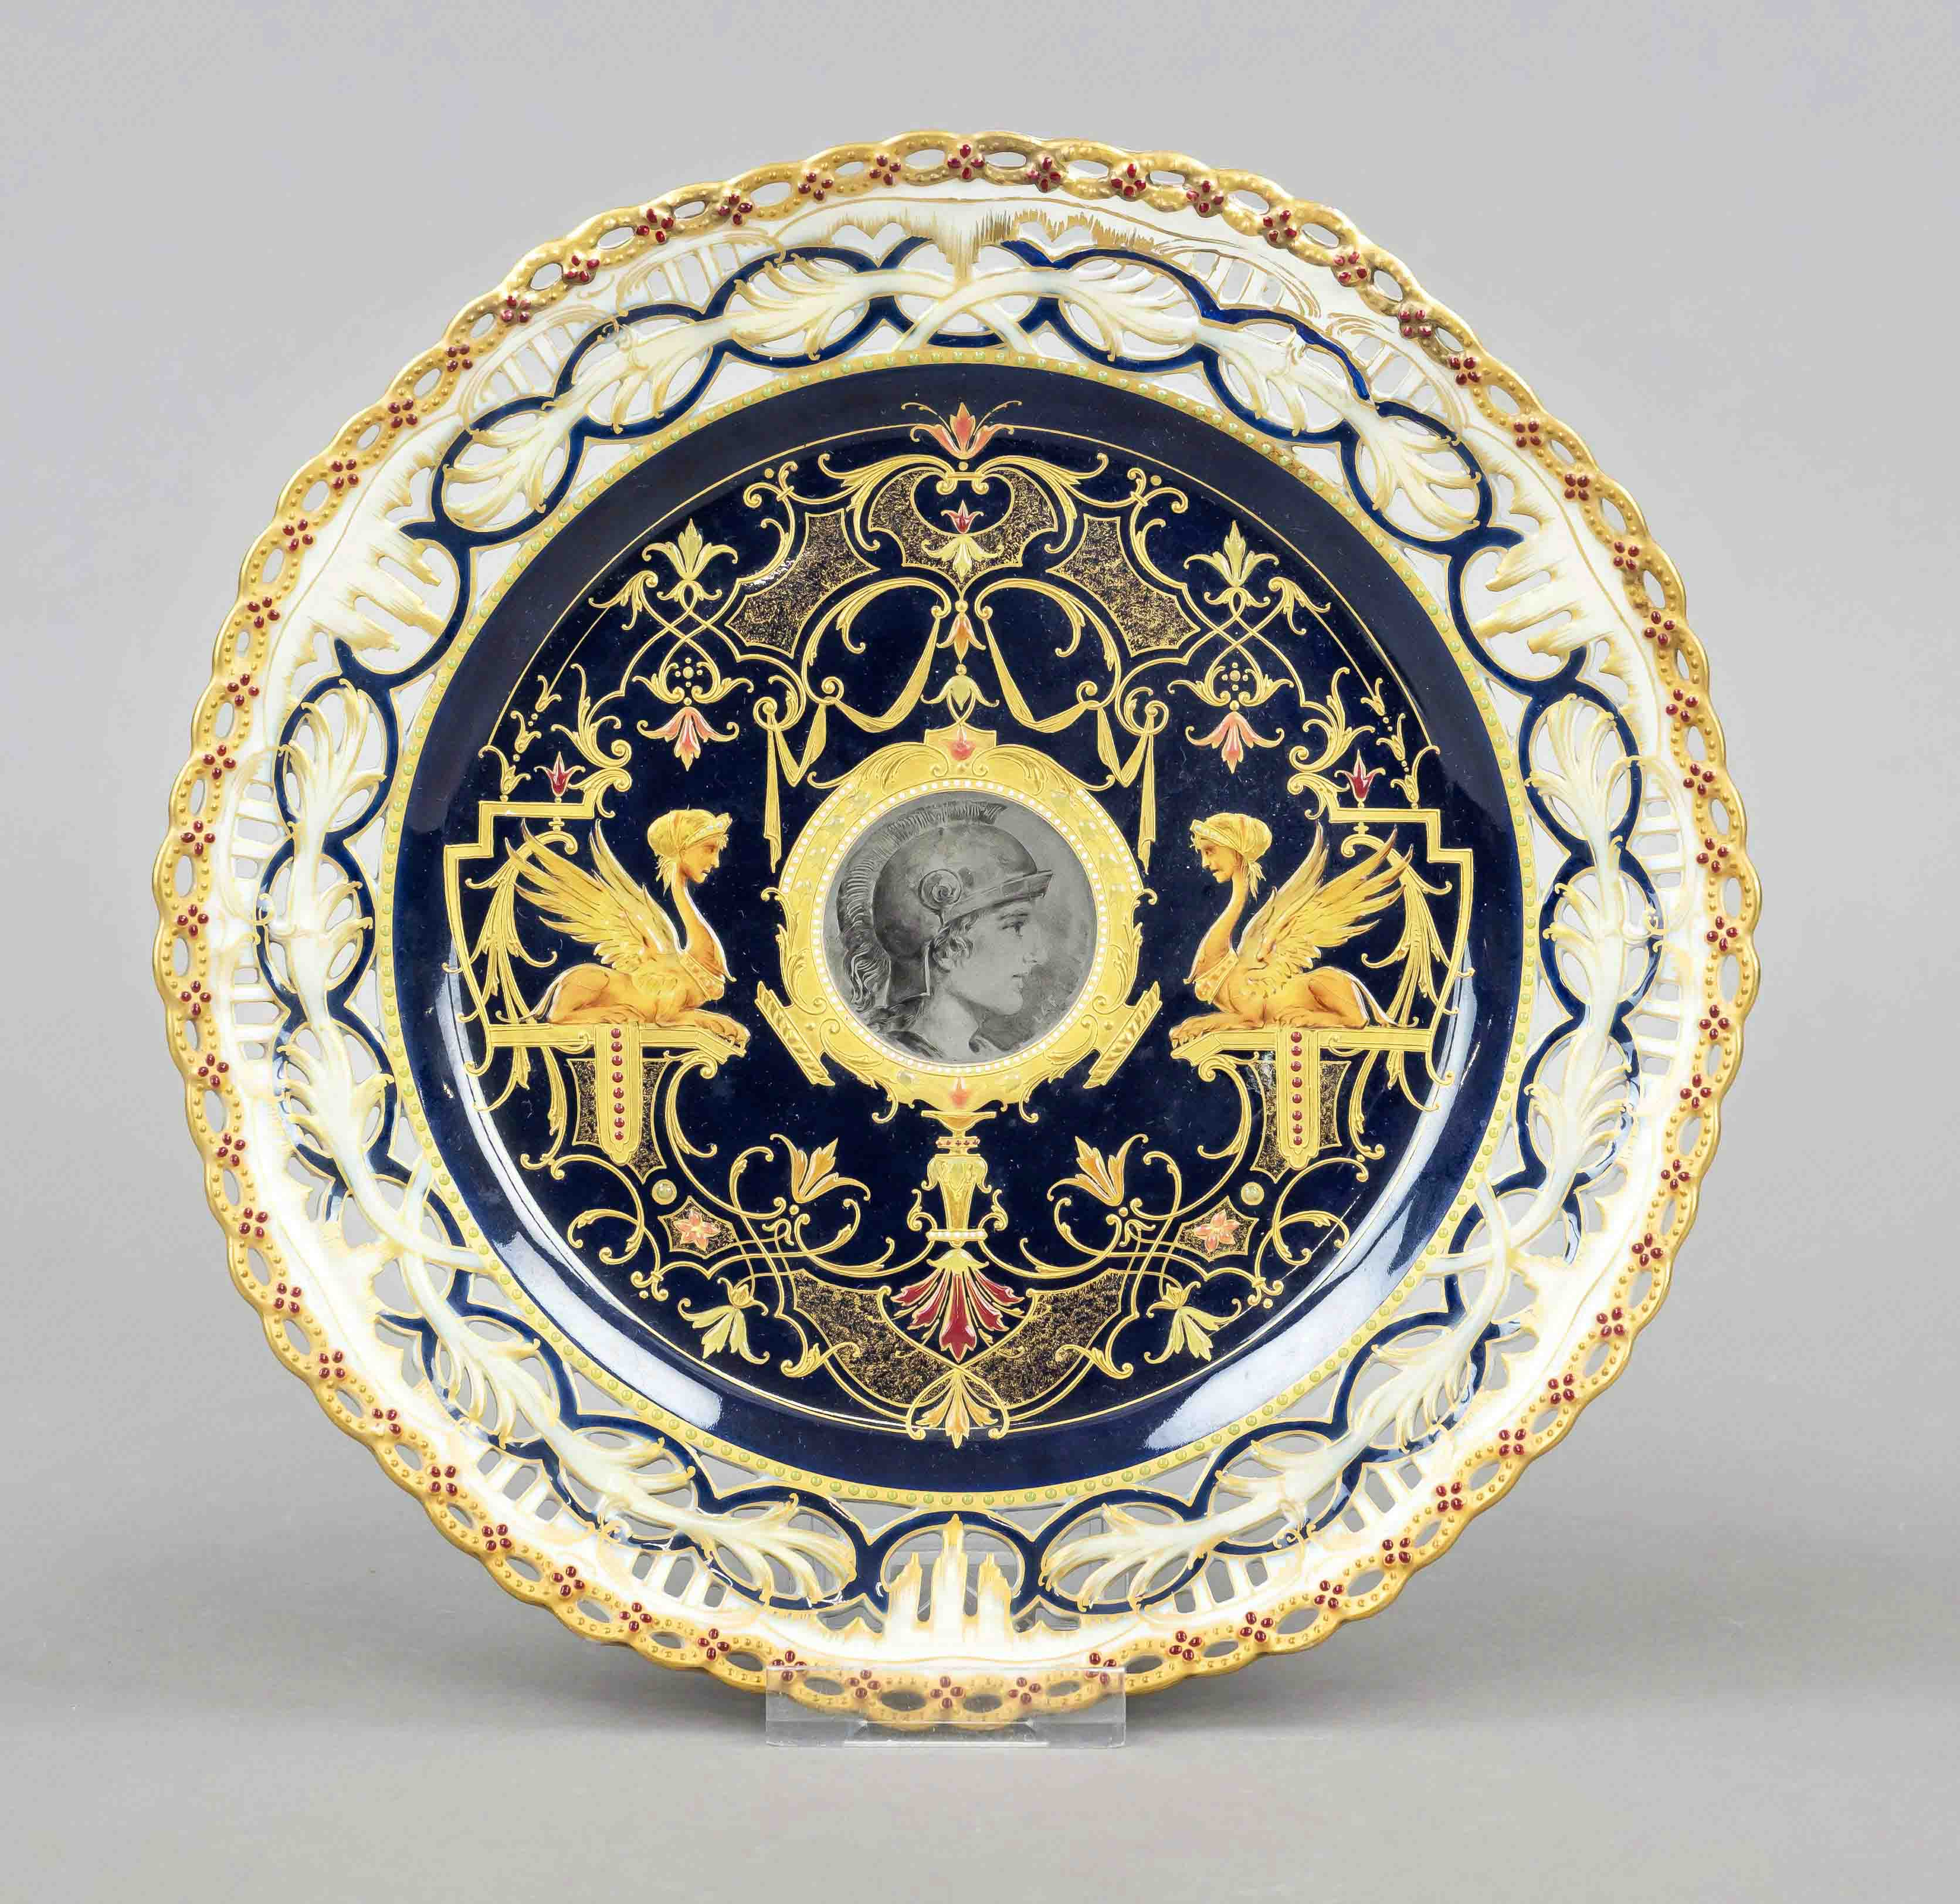 Decorative plate with fine relief enamel so-called jewel porcelain, KPM Berlin, mark before 1945,